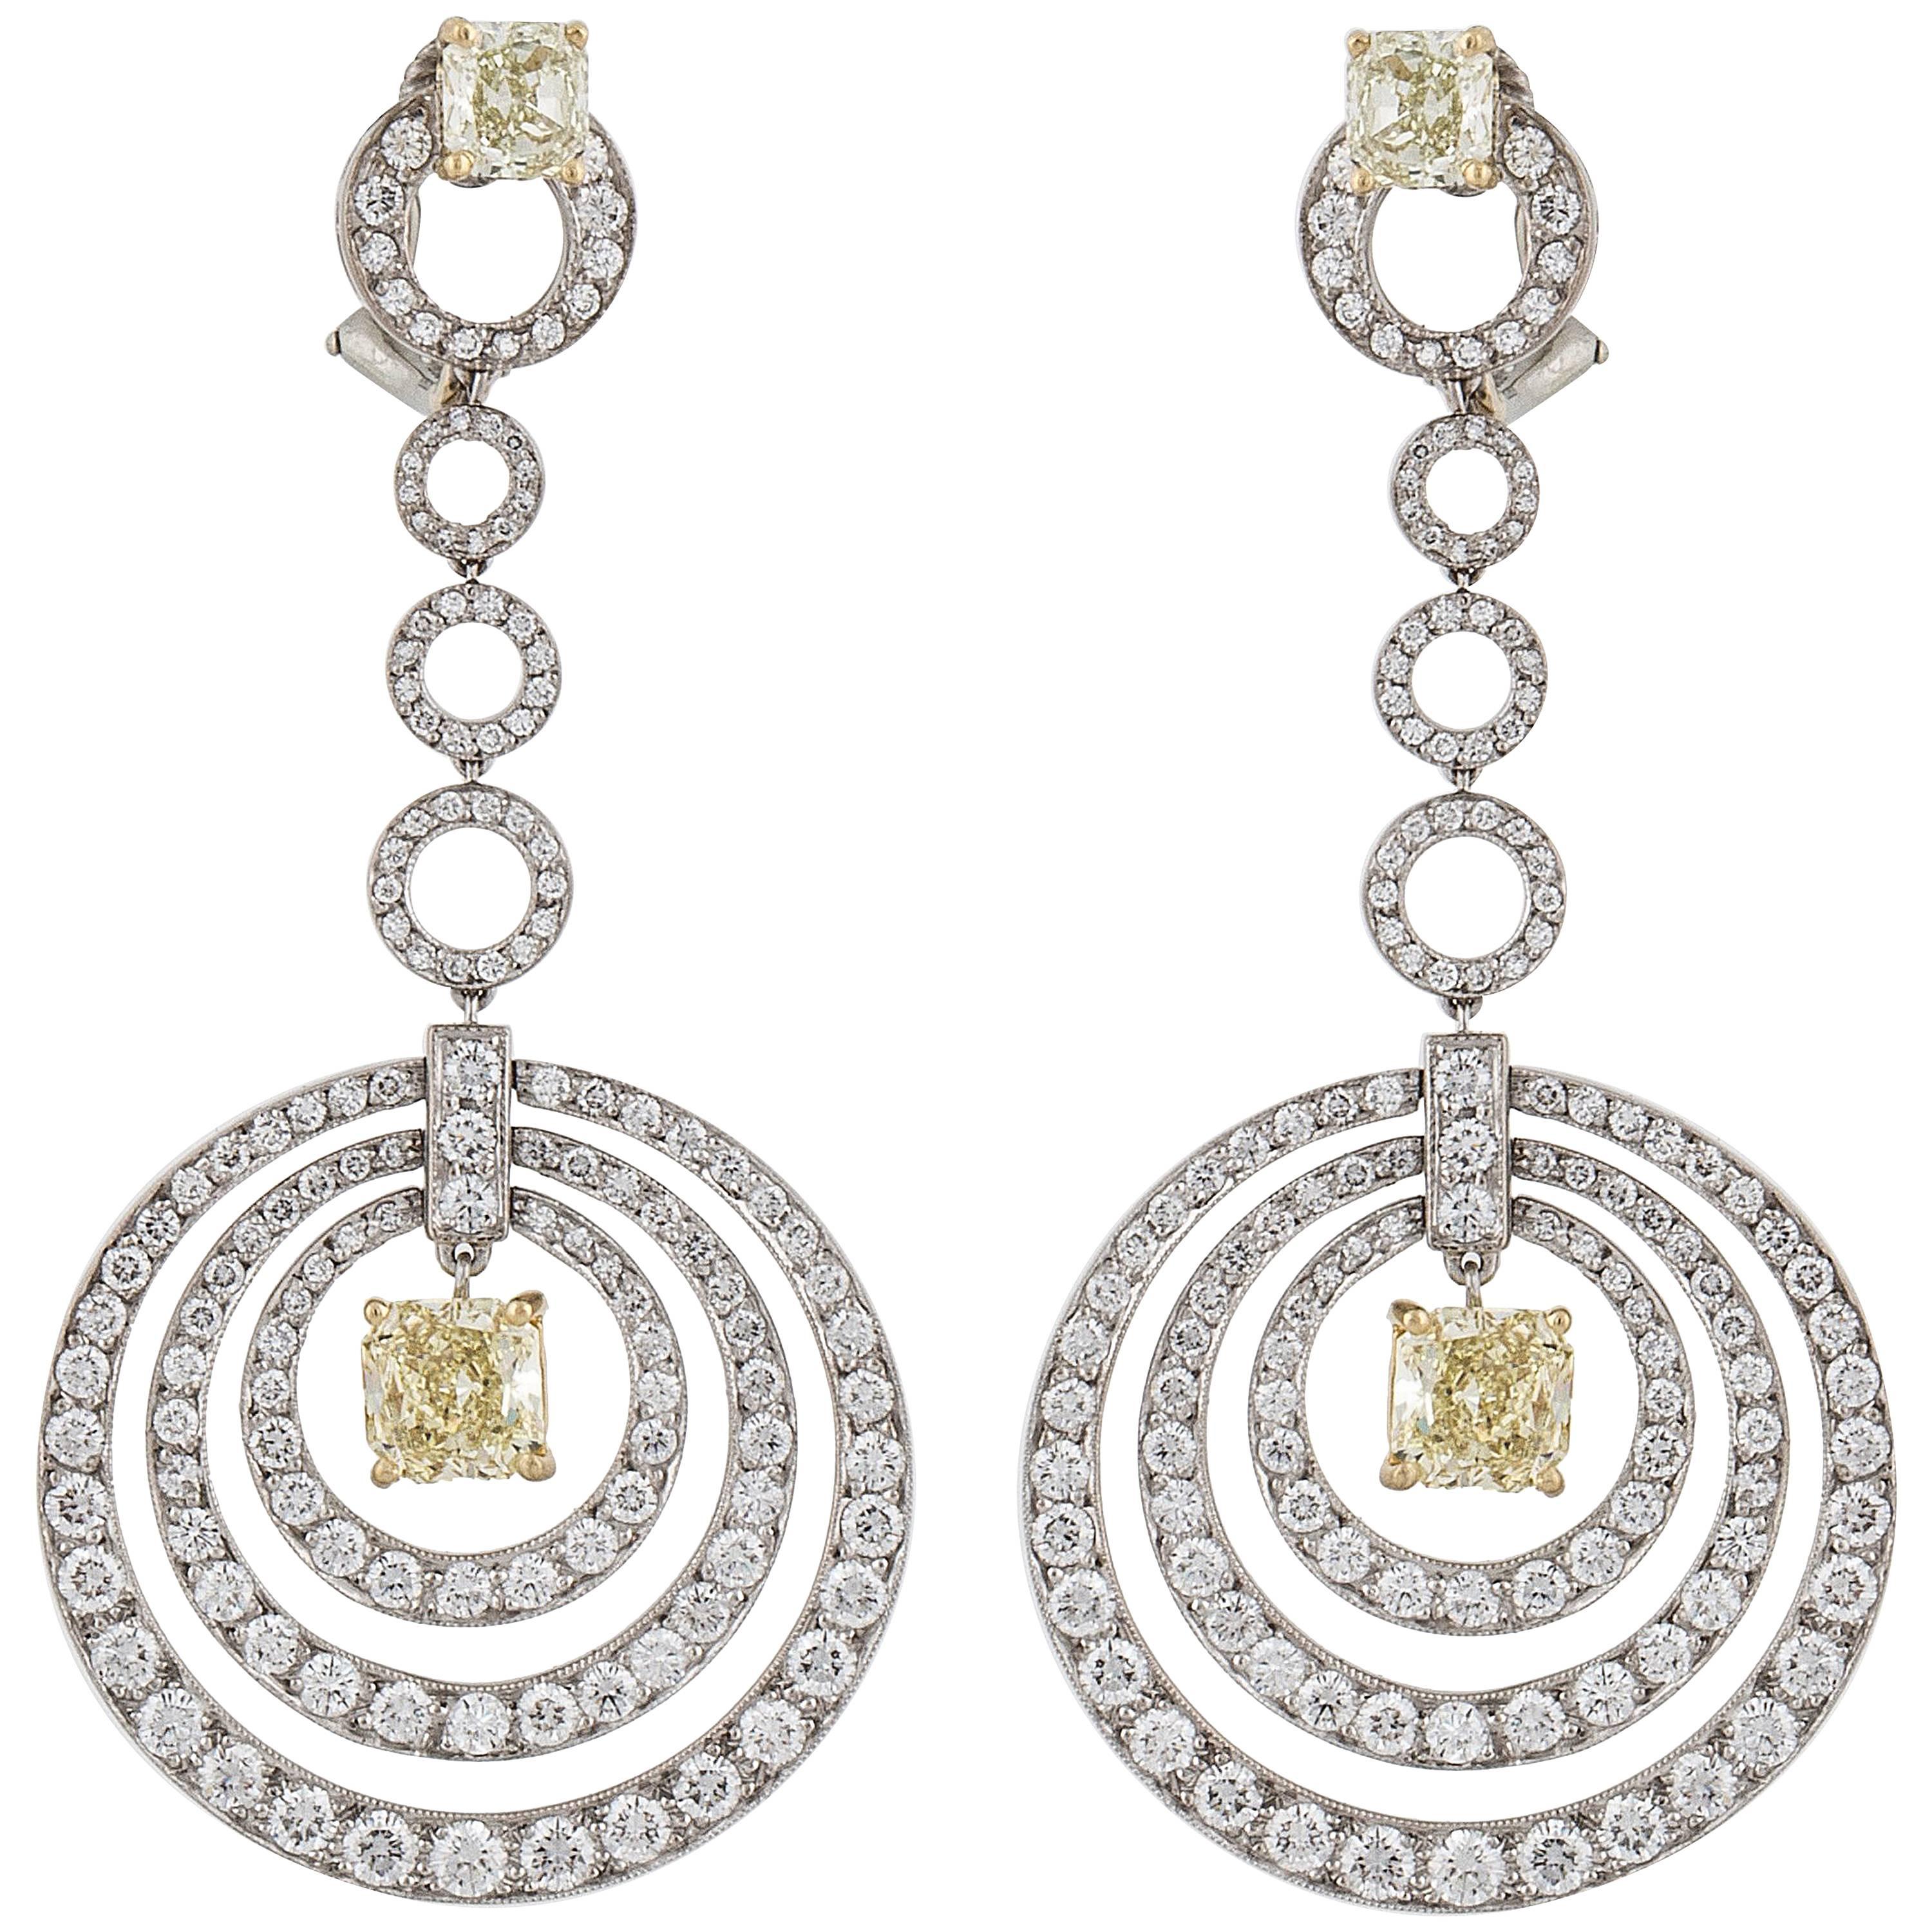 Graff Concentric White and Yellow Diamond Earrings in 18K Gold